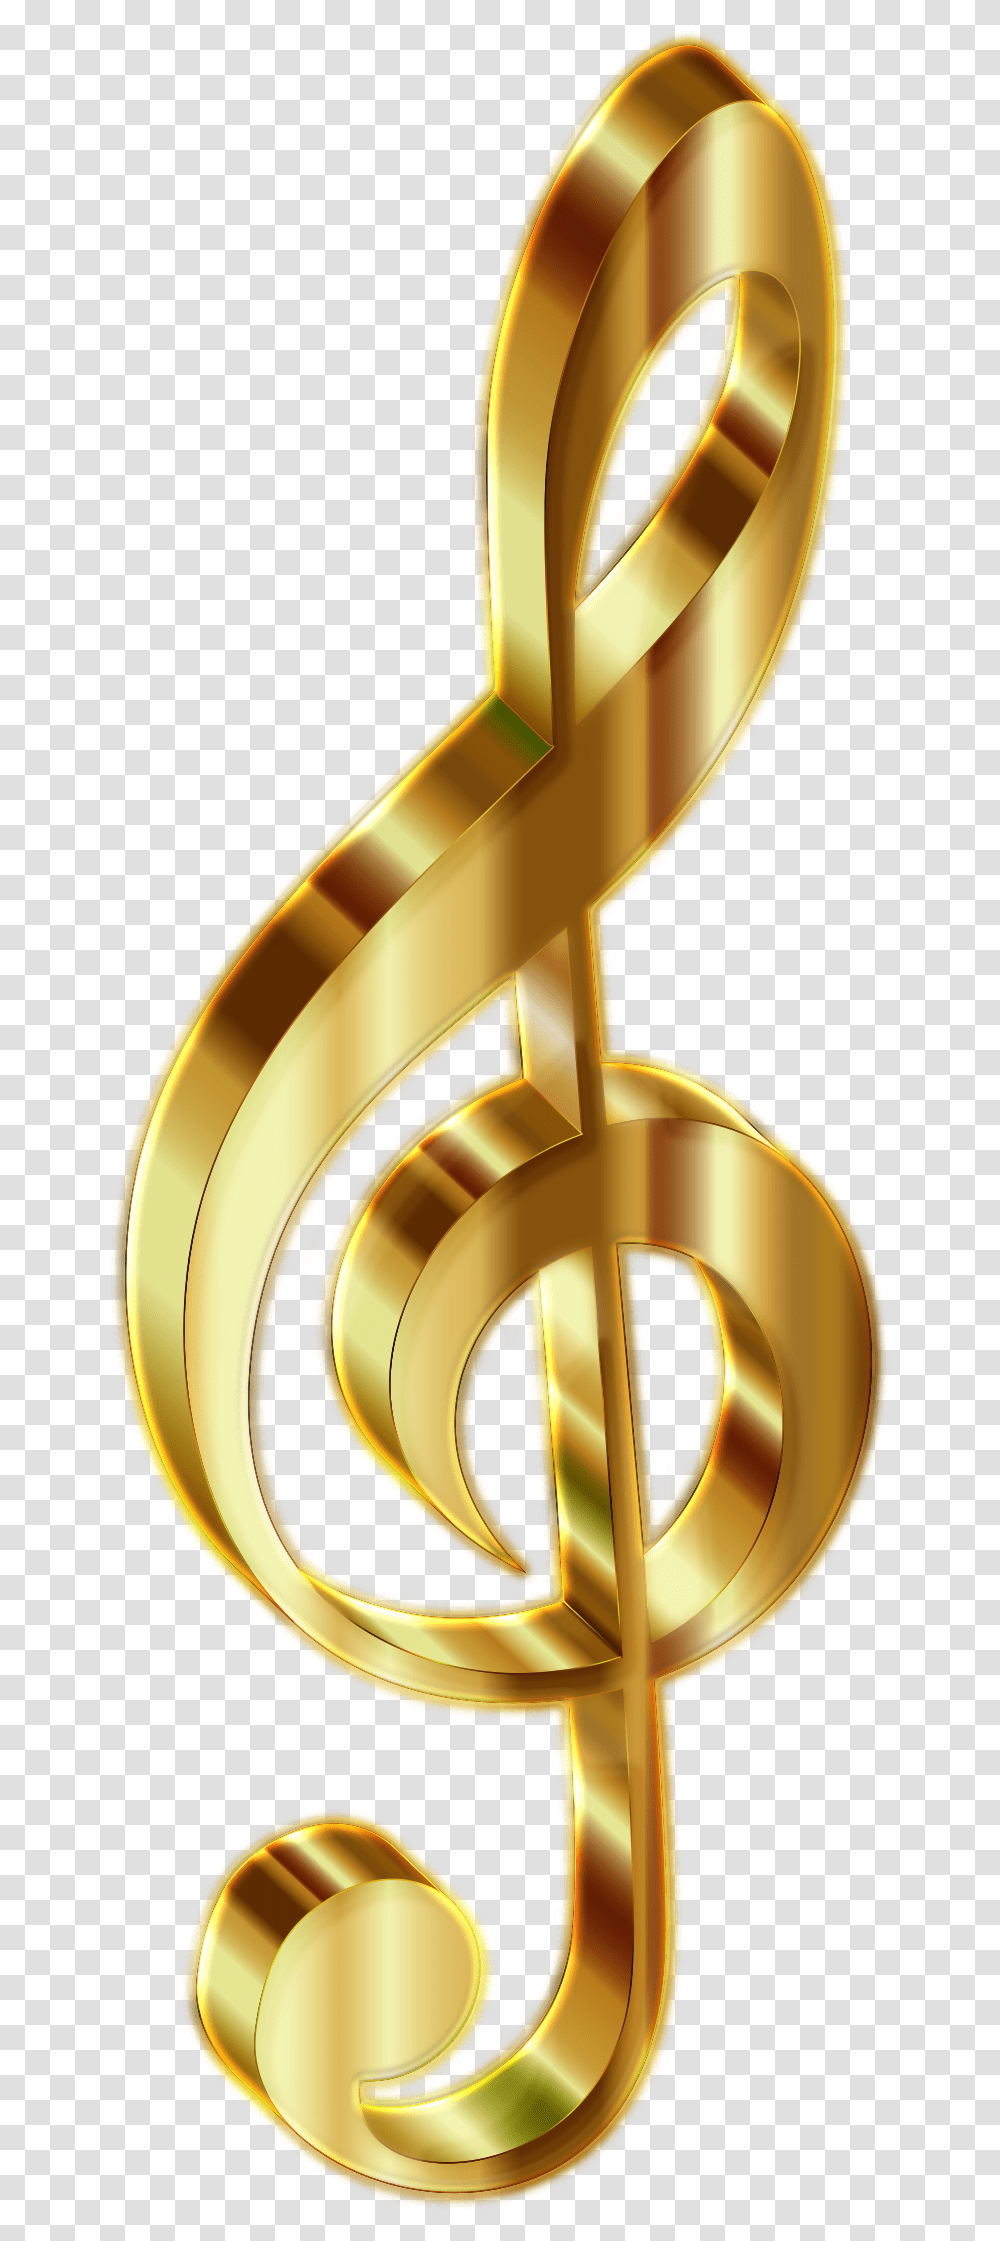 Gold 3d Clef 2 Enhanced No Background Clip Arts Gold Music Note, Brass Section, Musical Instrument, Horn, Trophy Transparent Png